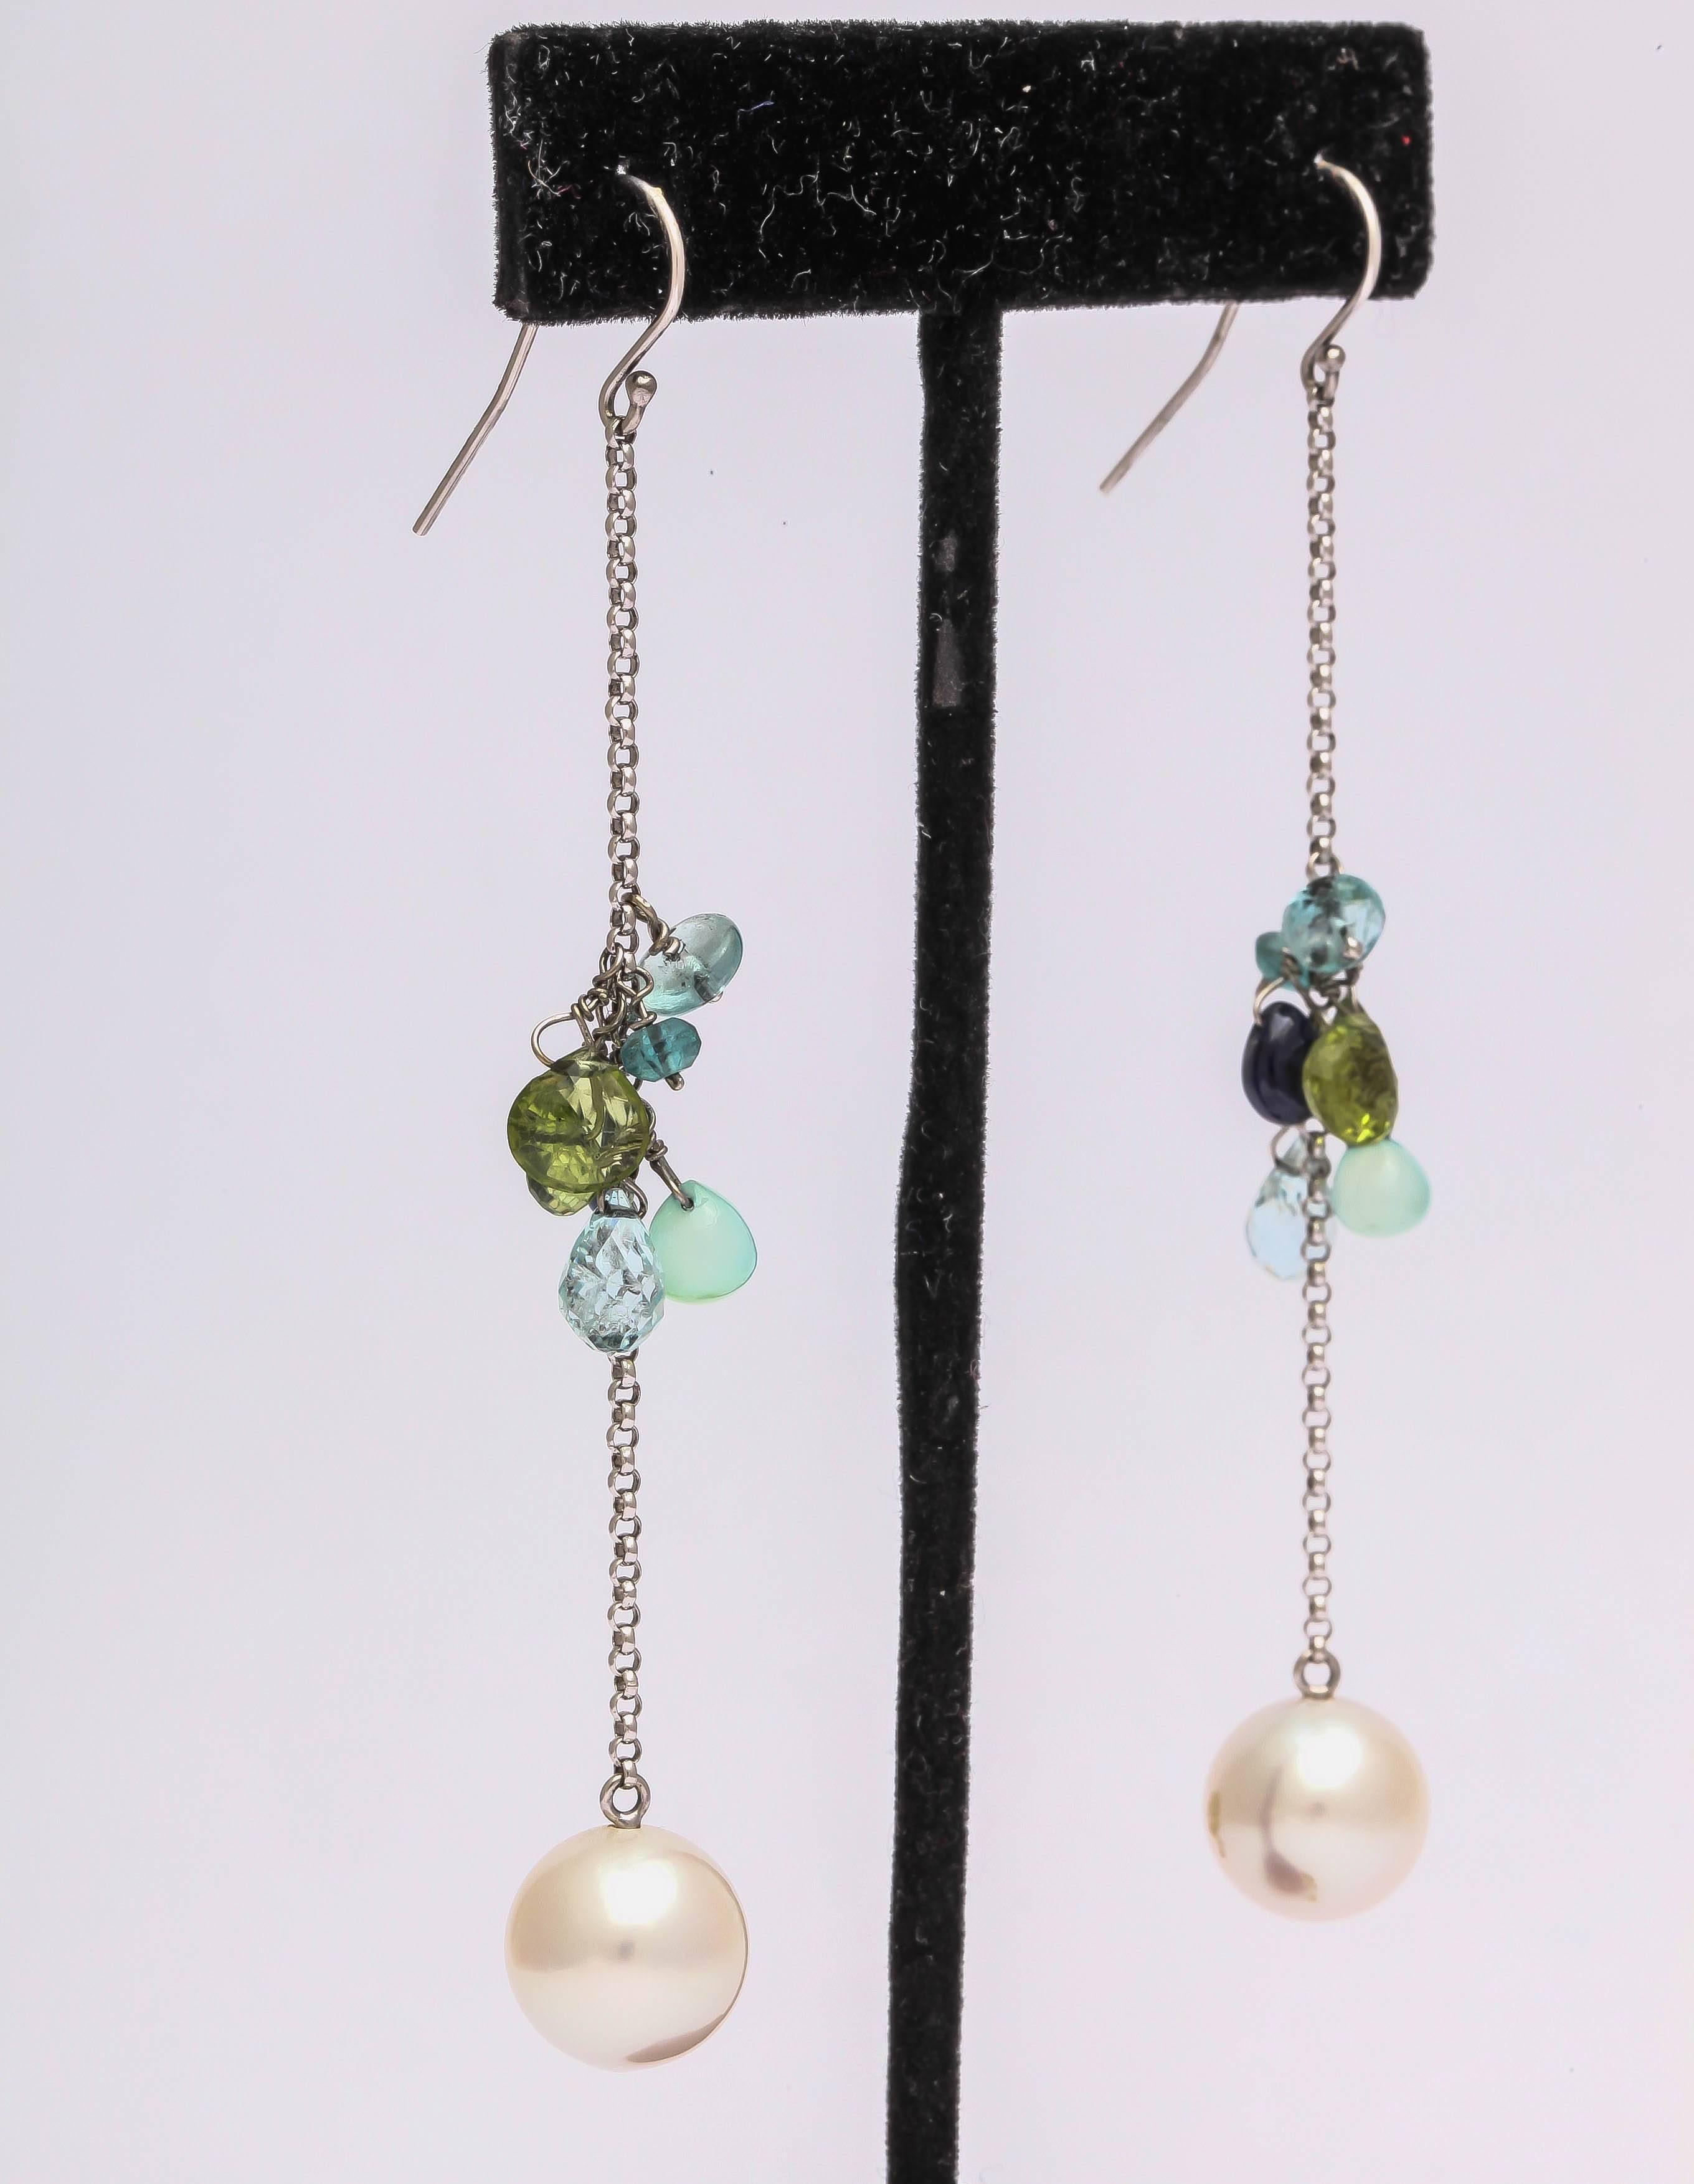 These are high fashion modern earrings. They are made in 14 kt white gold, South Sea pearl at the bottom of the chain with a mix of briolets and beads enhancing the center of the chain. The total length is 3 1/2 inches from the top of the ear hook